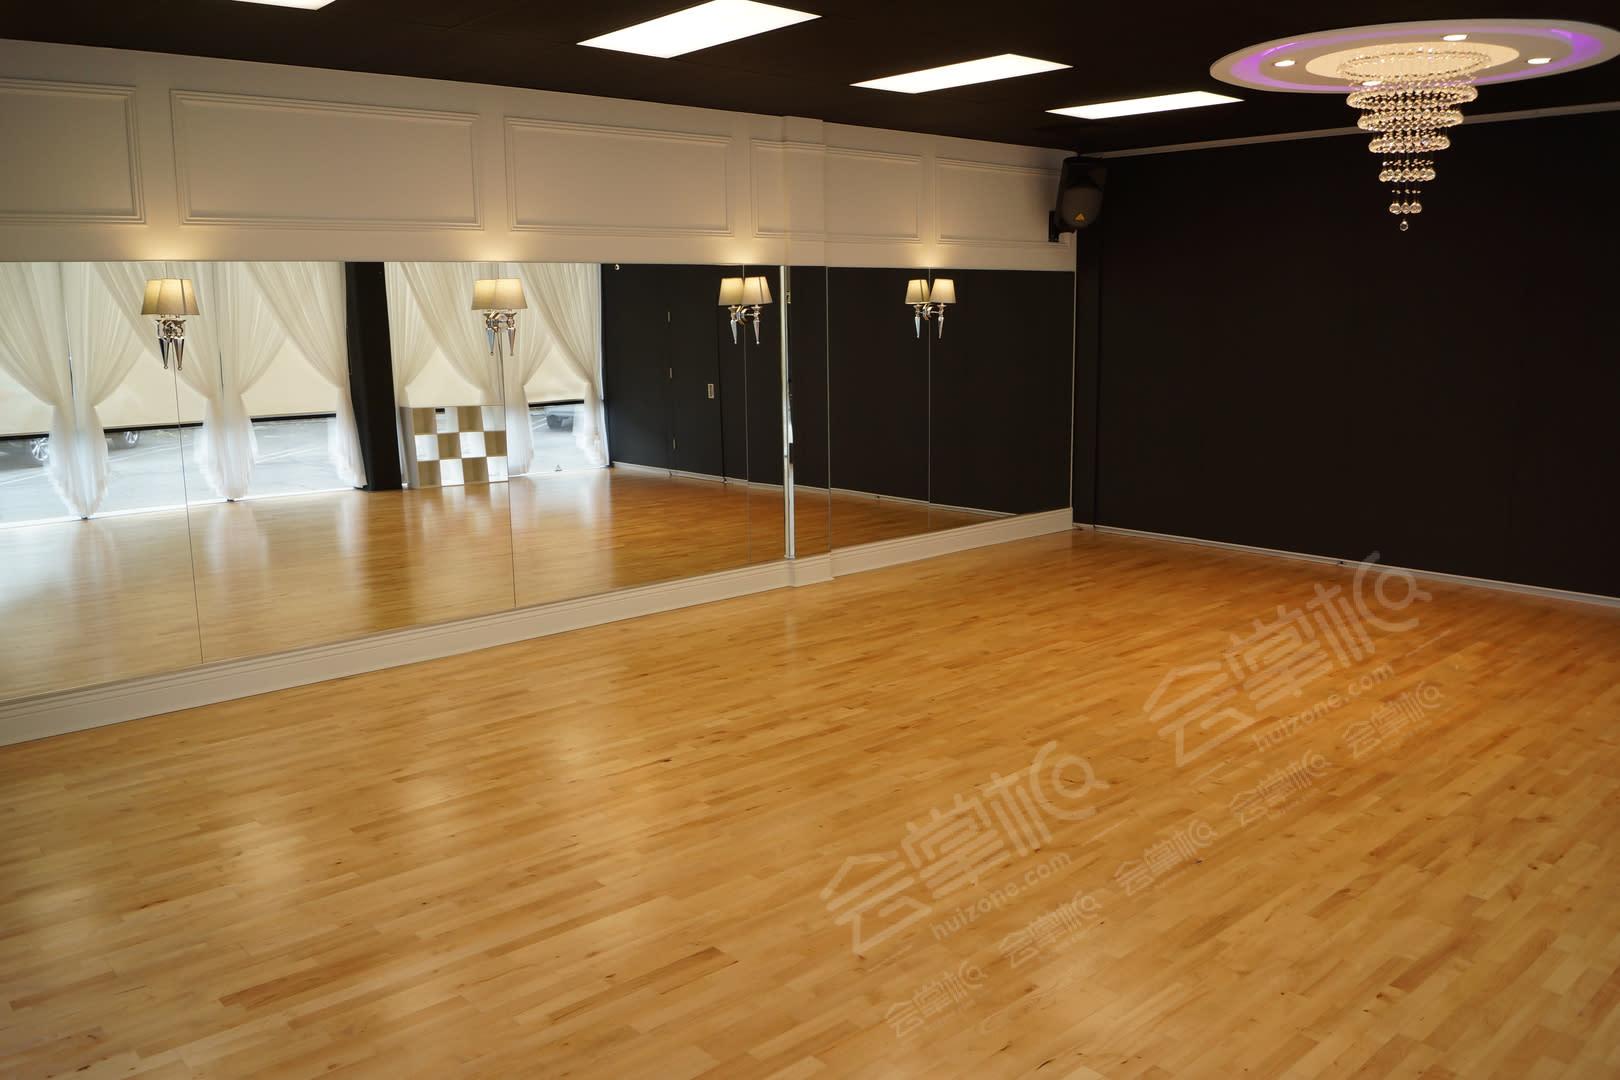 Entire Space - Dance Studio/Production/Event/Fitness Space in Burbank